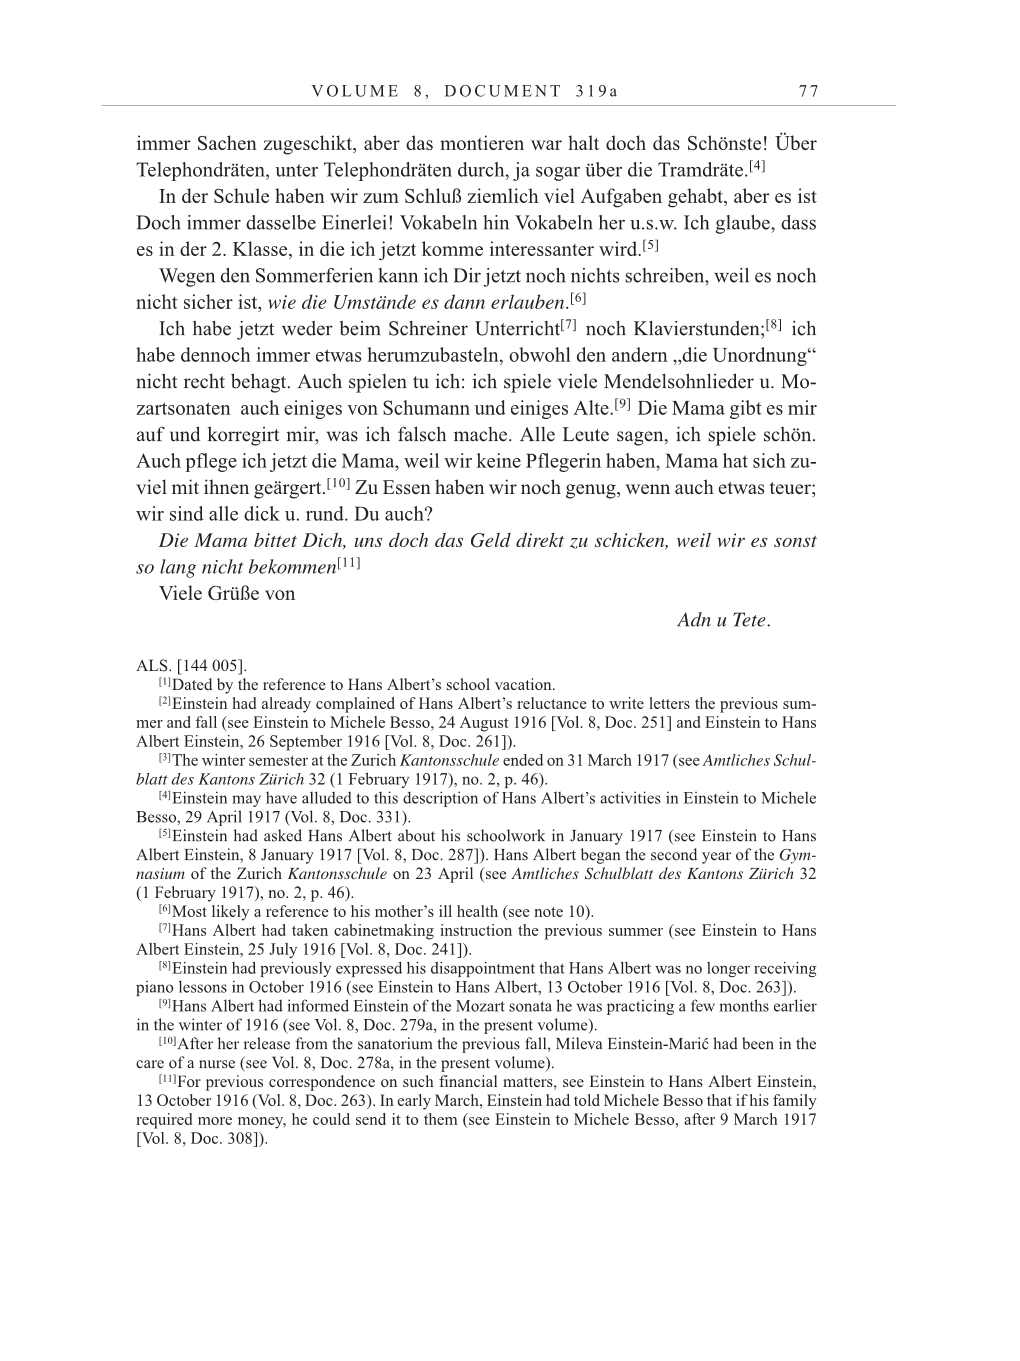 Volume 10: The Berlin Years: Correspondence May-December 1920 / Supplementary Correspondence 1909-1920 page 77